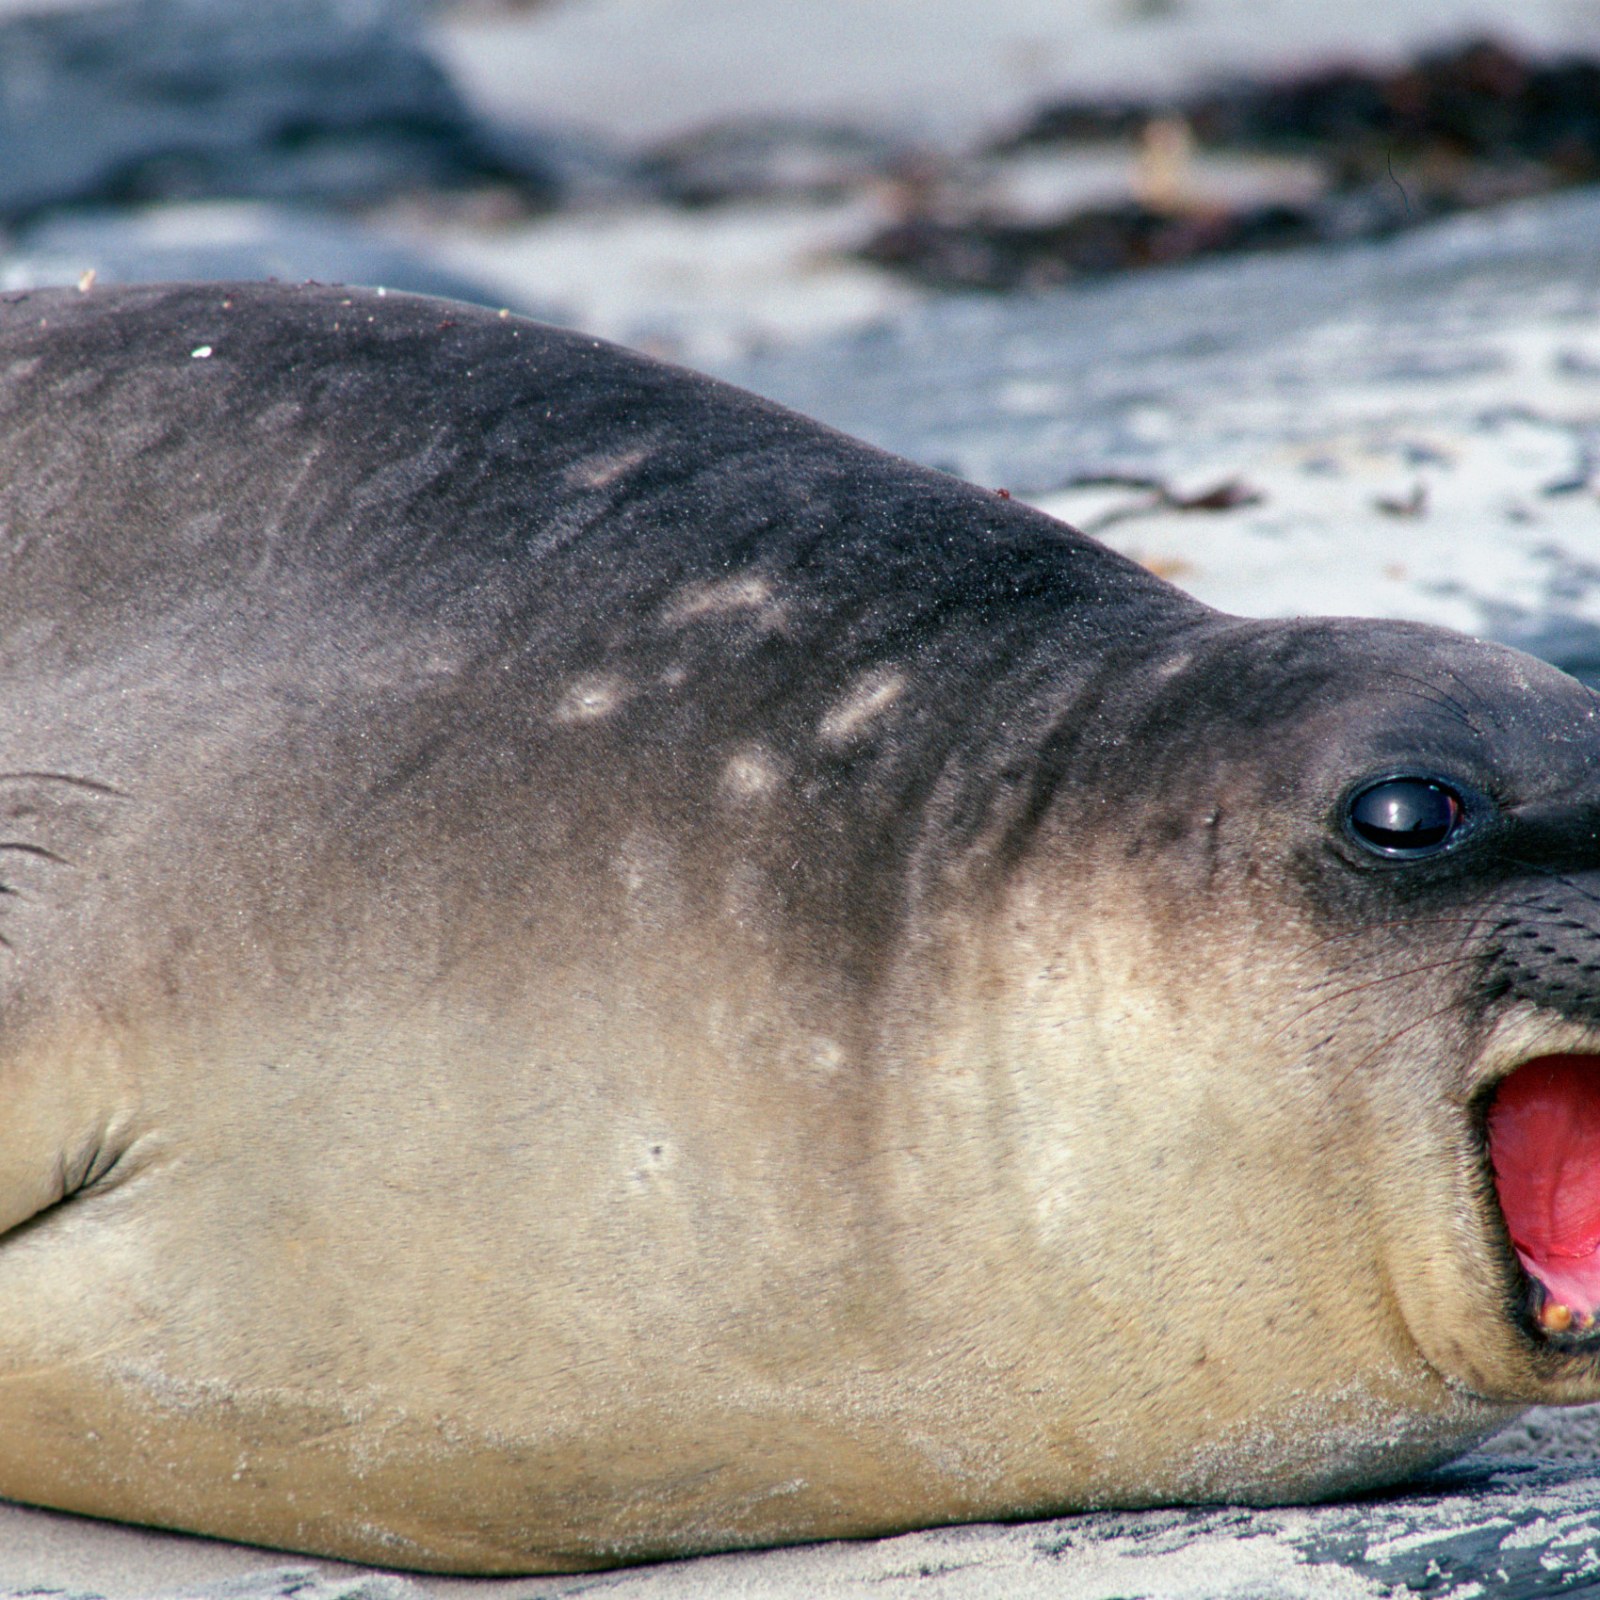 Fact Check: Did Elephant Seal Appear on Florida Street After Hurricane Ian?